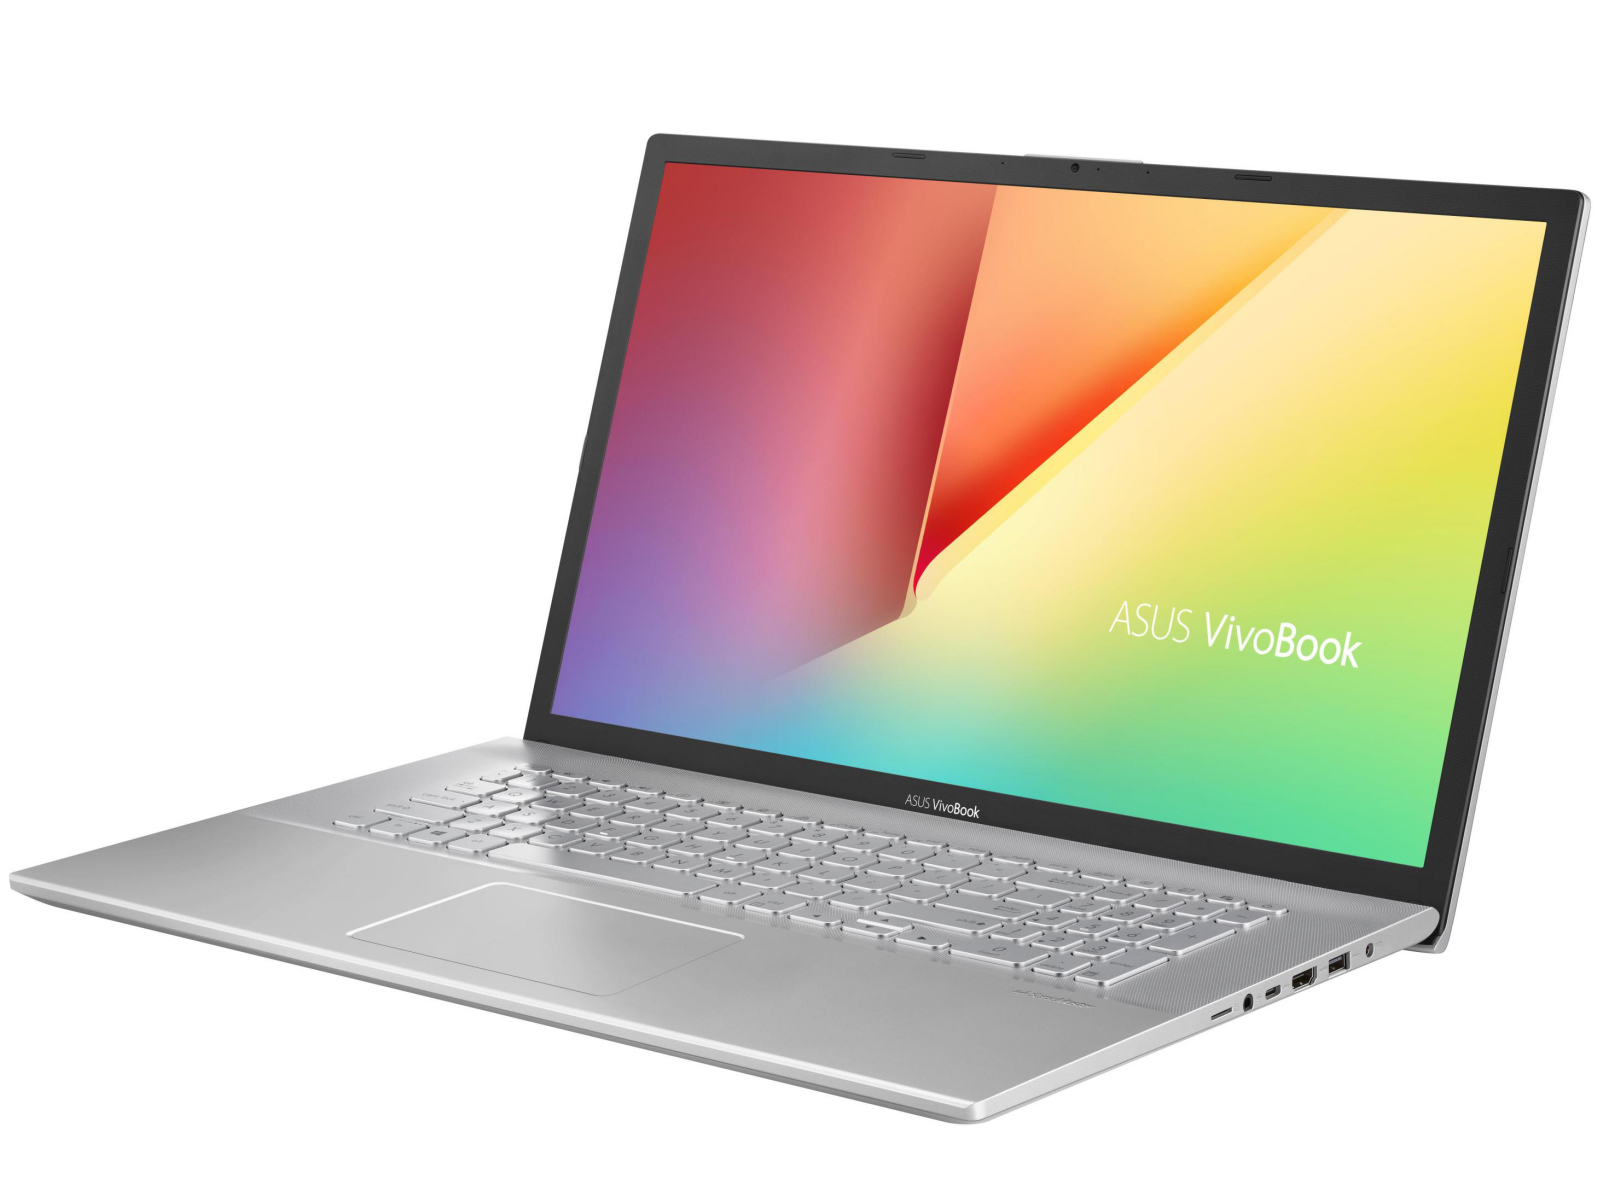 Asus VivoBook 17 F712FA Review: Lackluster 17.3-inch laptop for home -  NotebookCheck.net Reviews